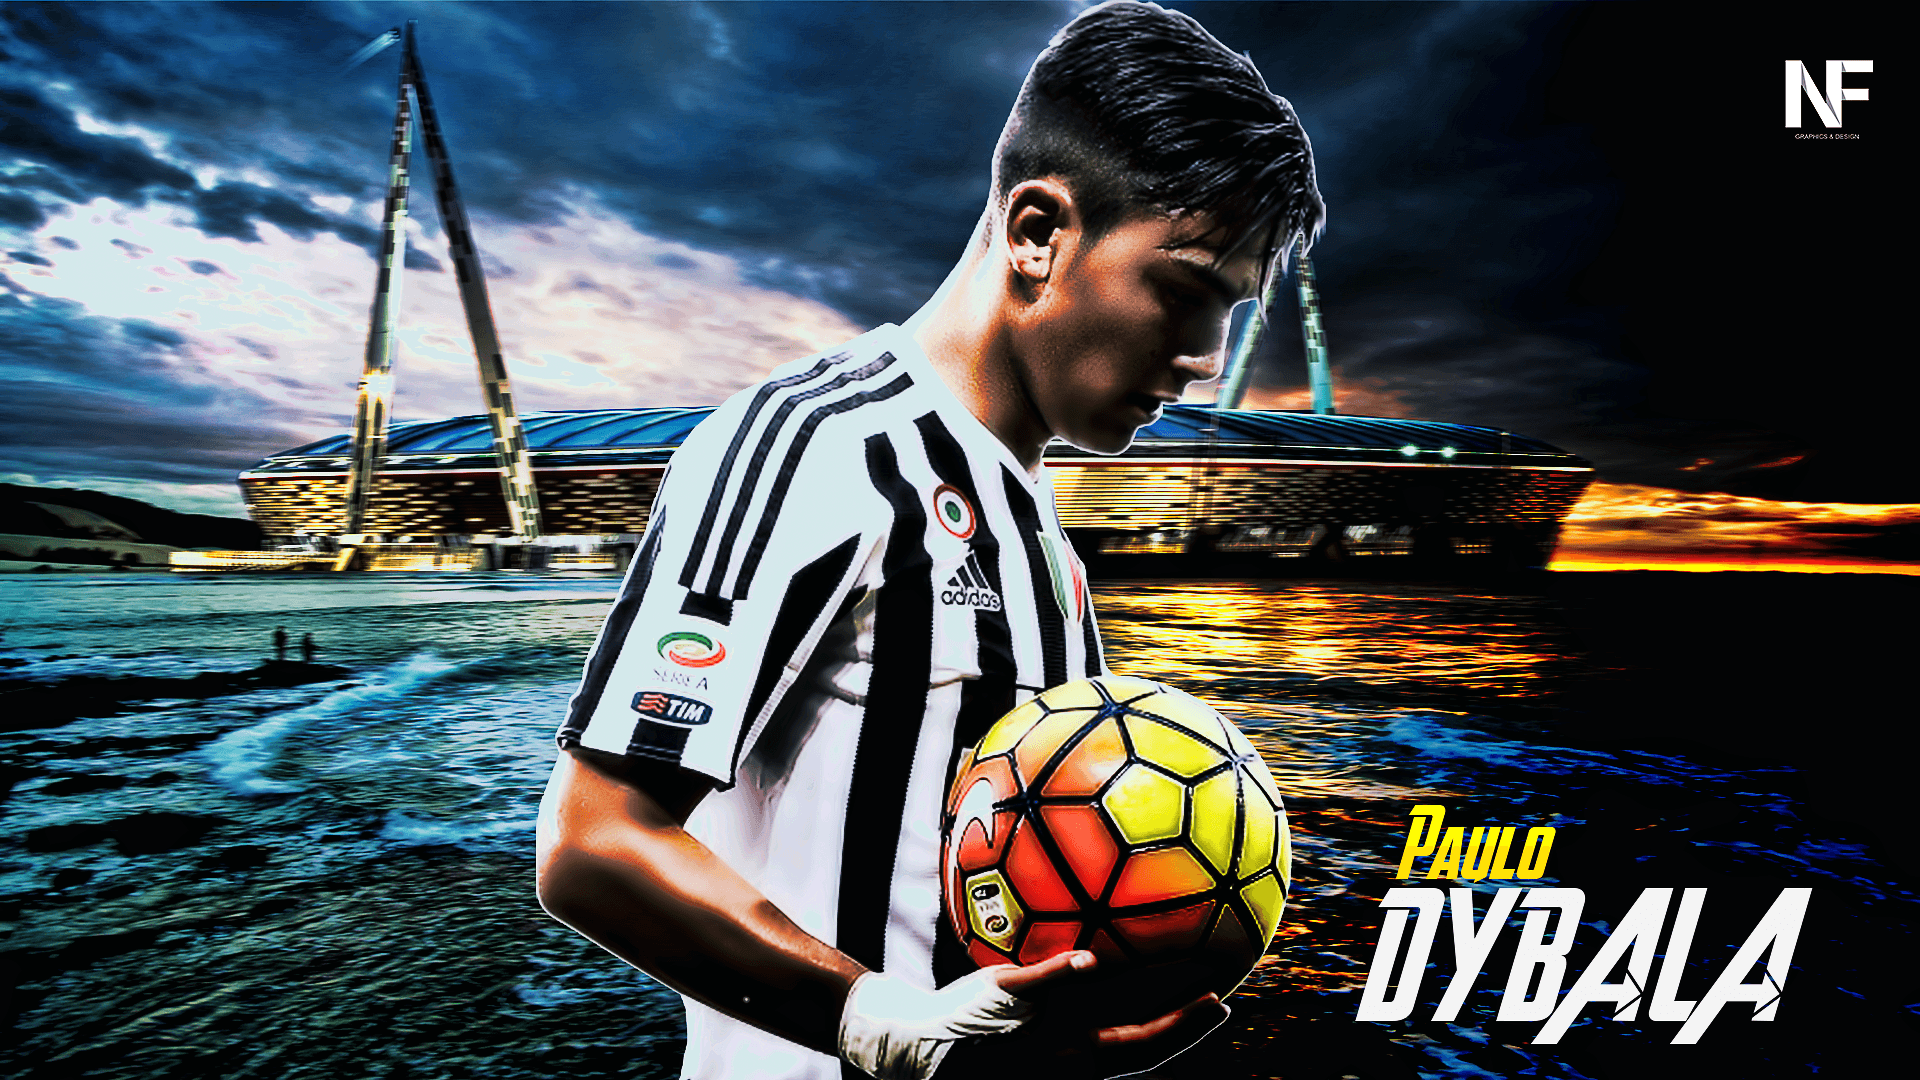 Dybala Wallpaper iPhone Related Keywords & Suggestions